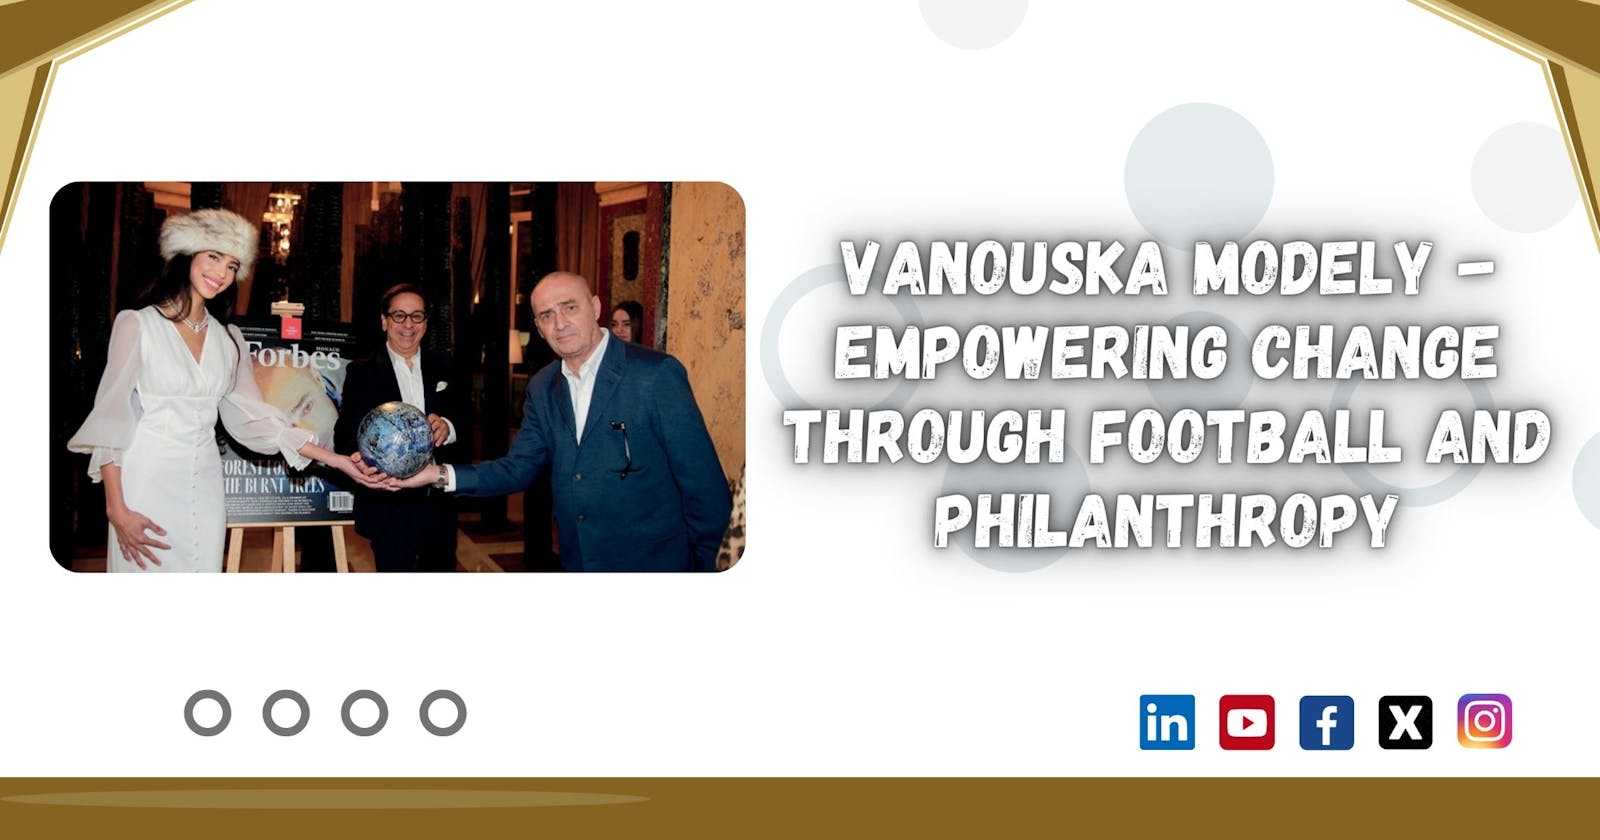 Vanouska Modely - Empowering Change Through Football and Philanthropy